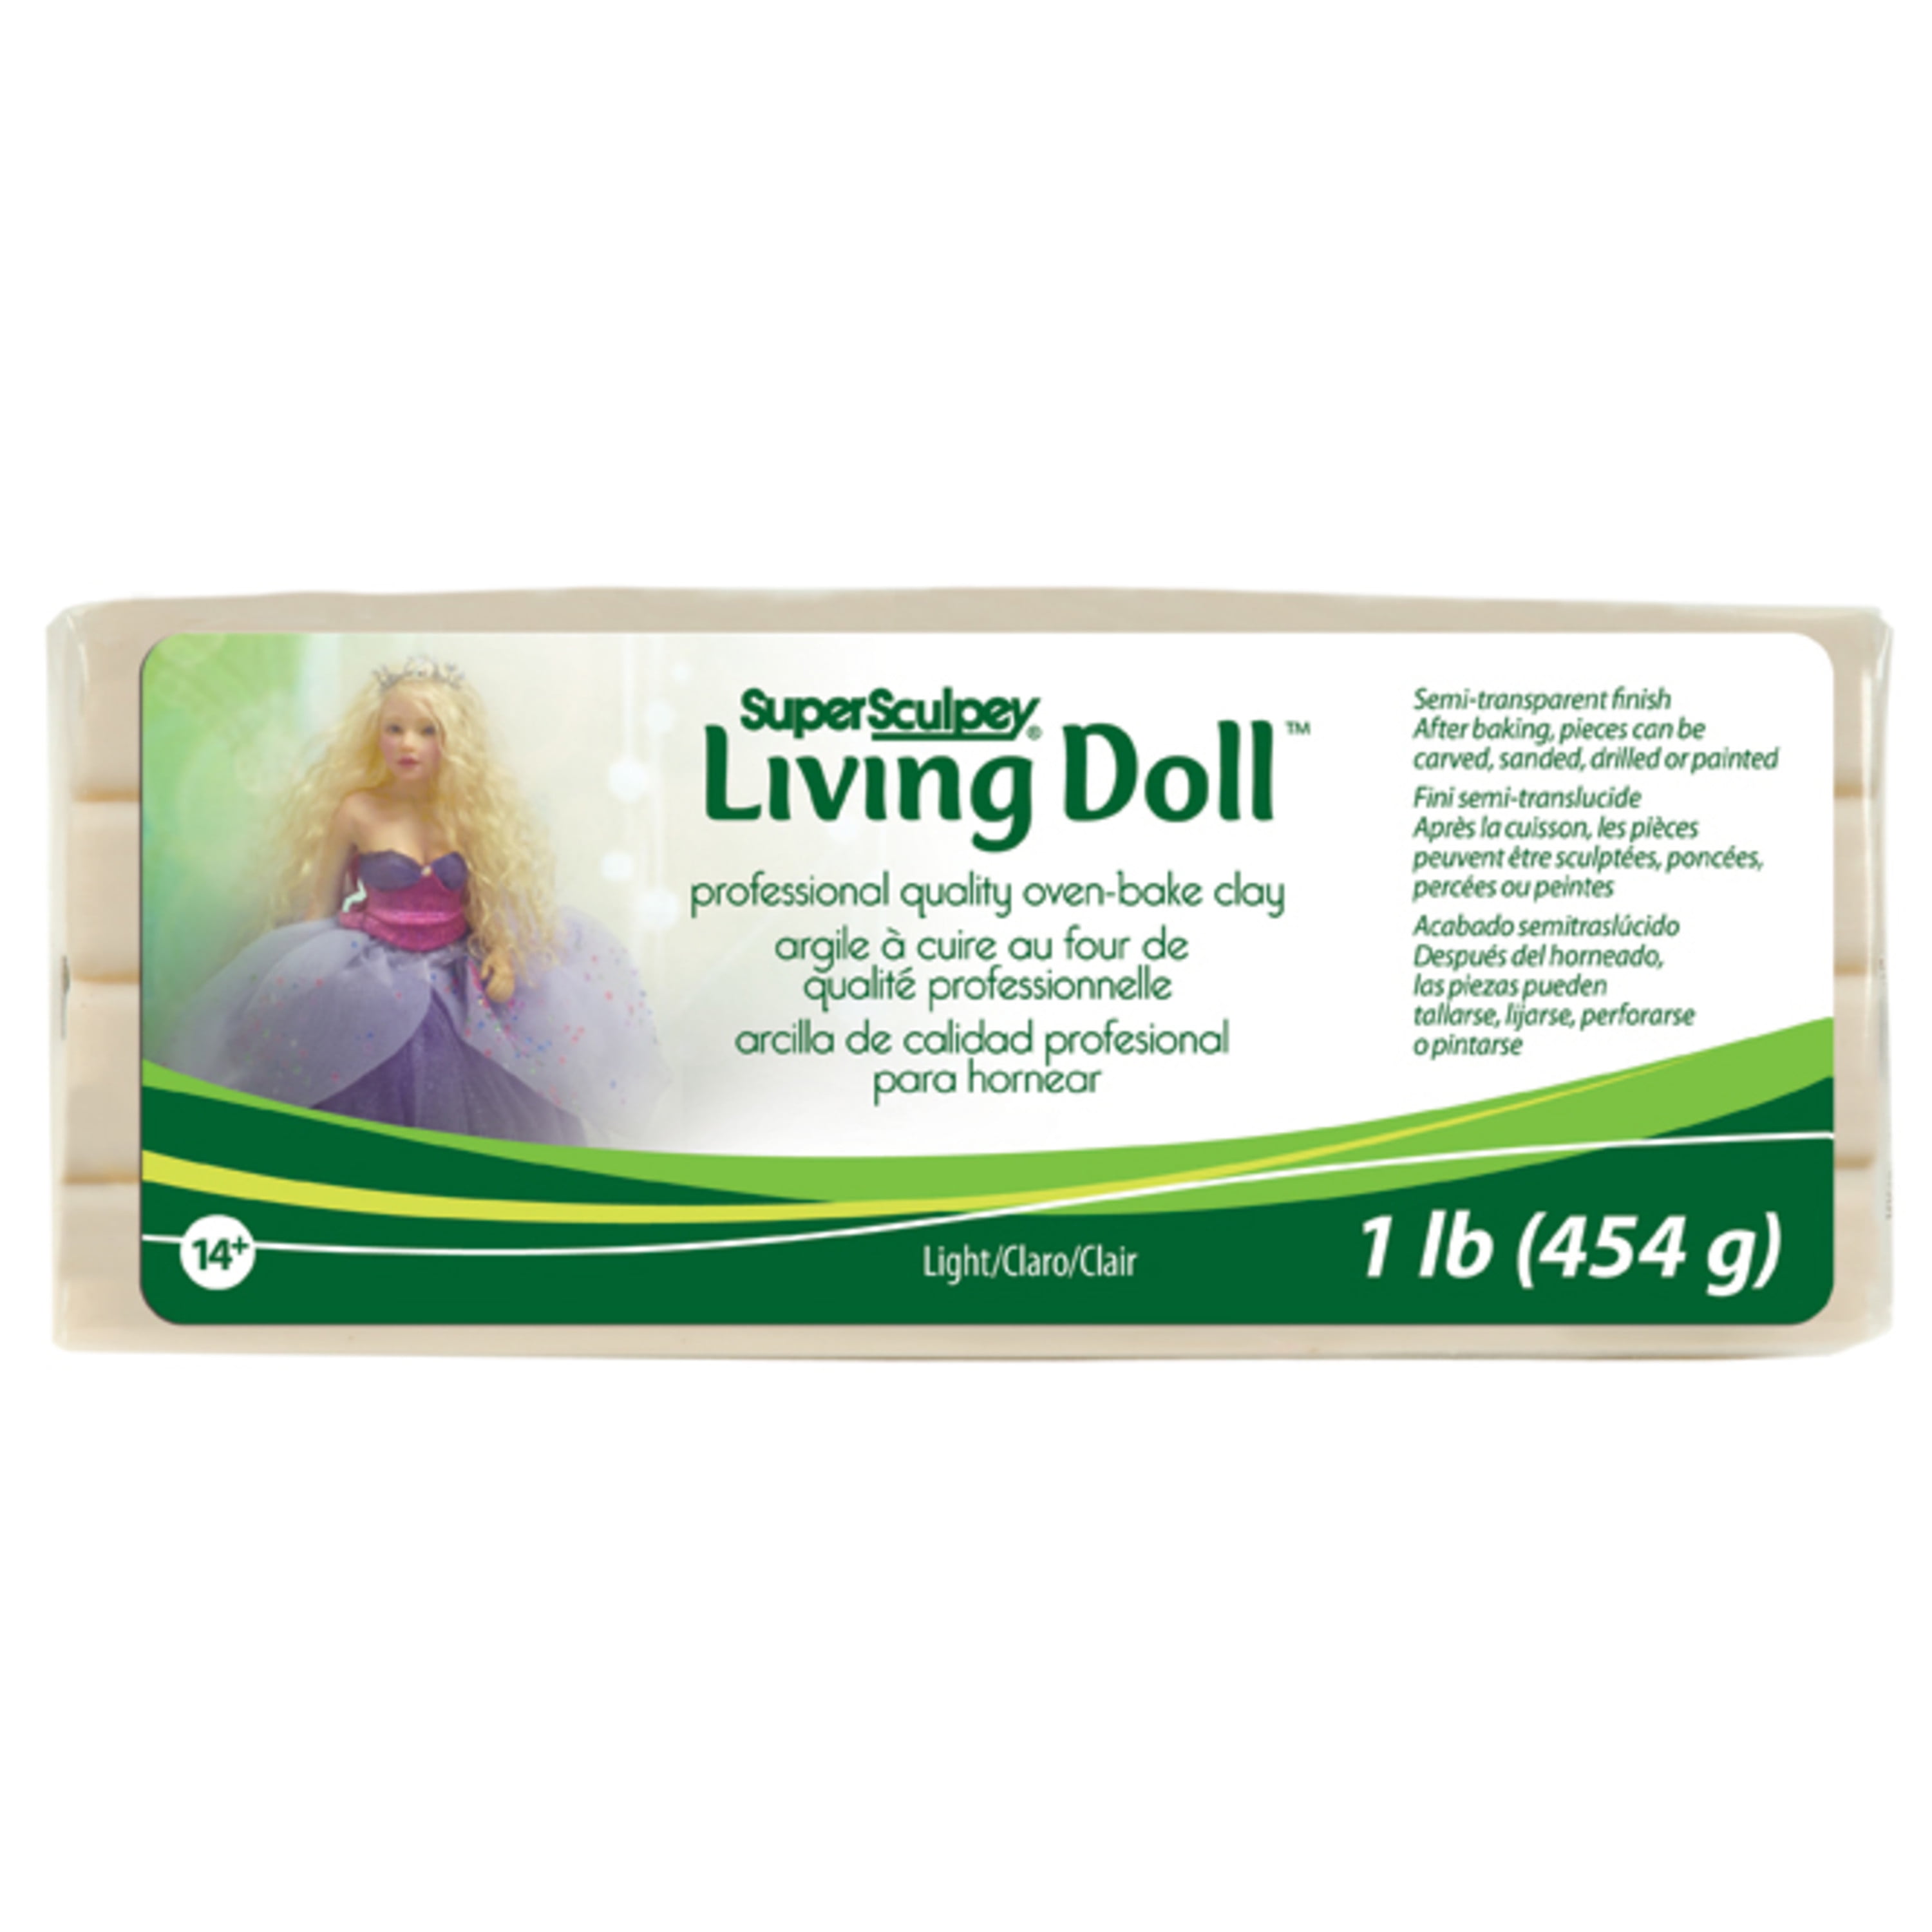 Super Sculpey LIVING DOLL LIGHT BABY & BEIGE 1lb/454g to 12lbs Polymer Clay Soft 